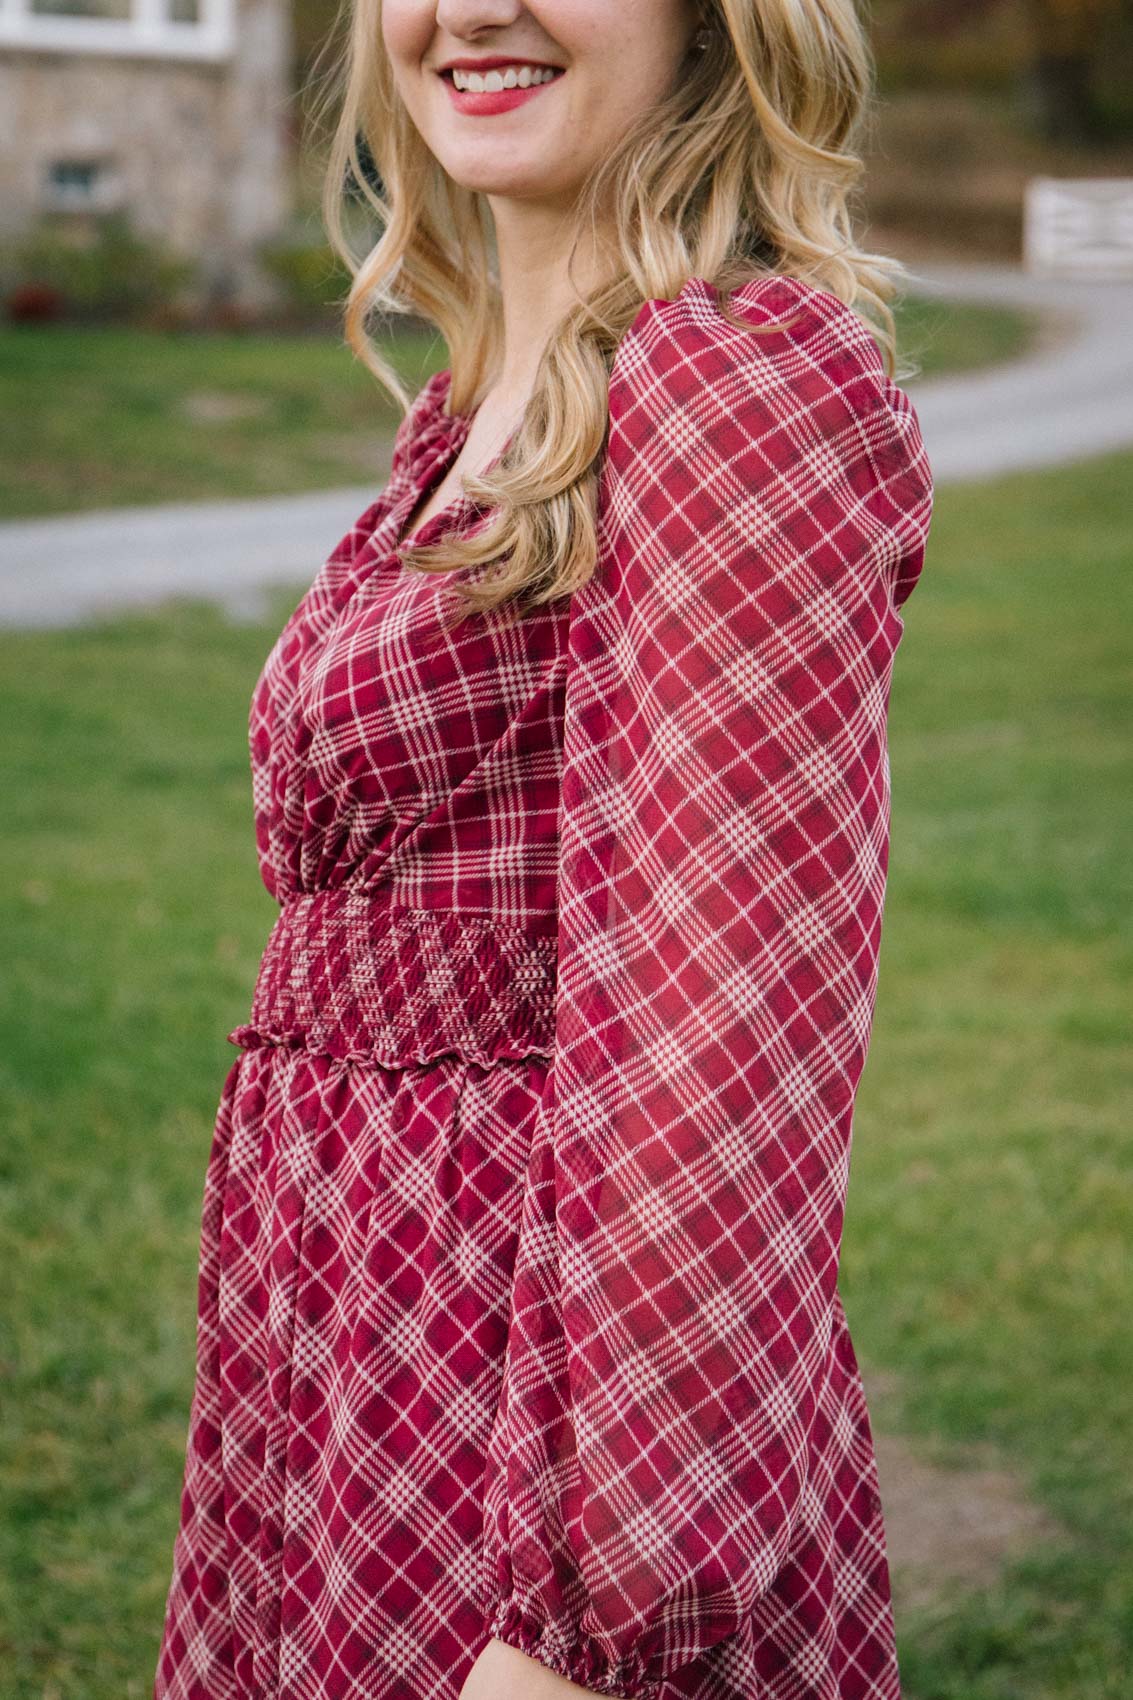 Winter outfit inspiration on how to wear with a plaid dress. 